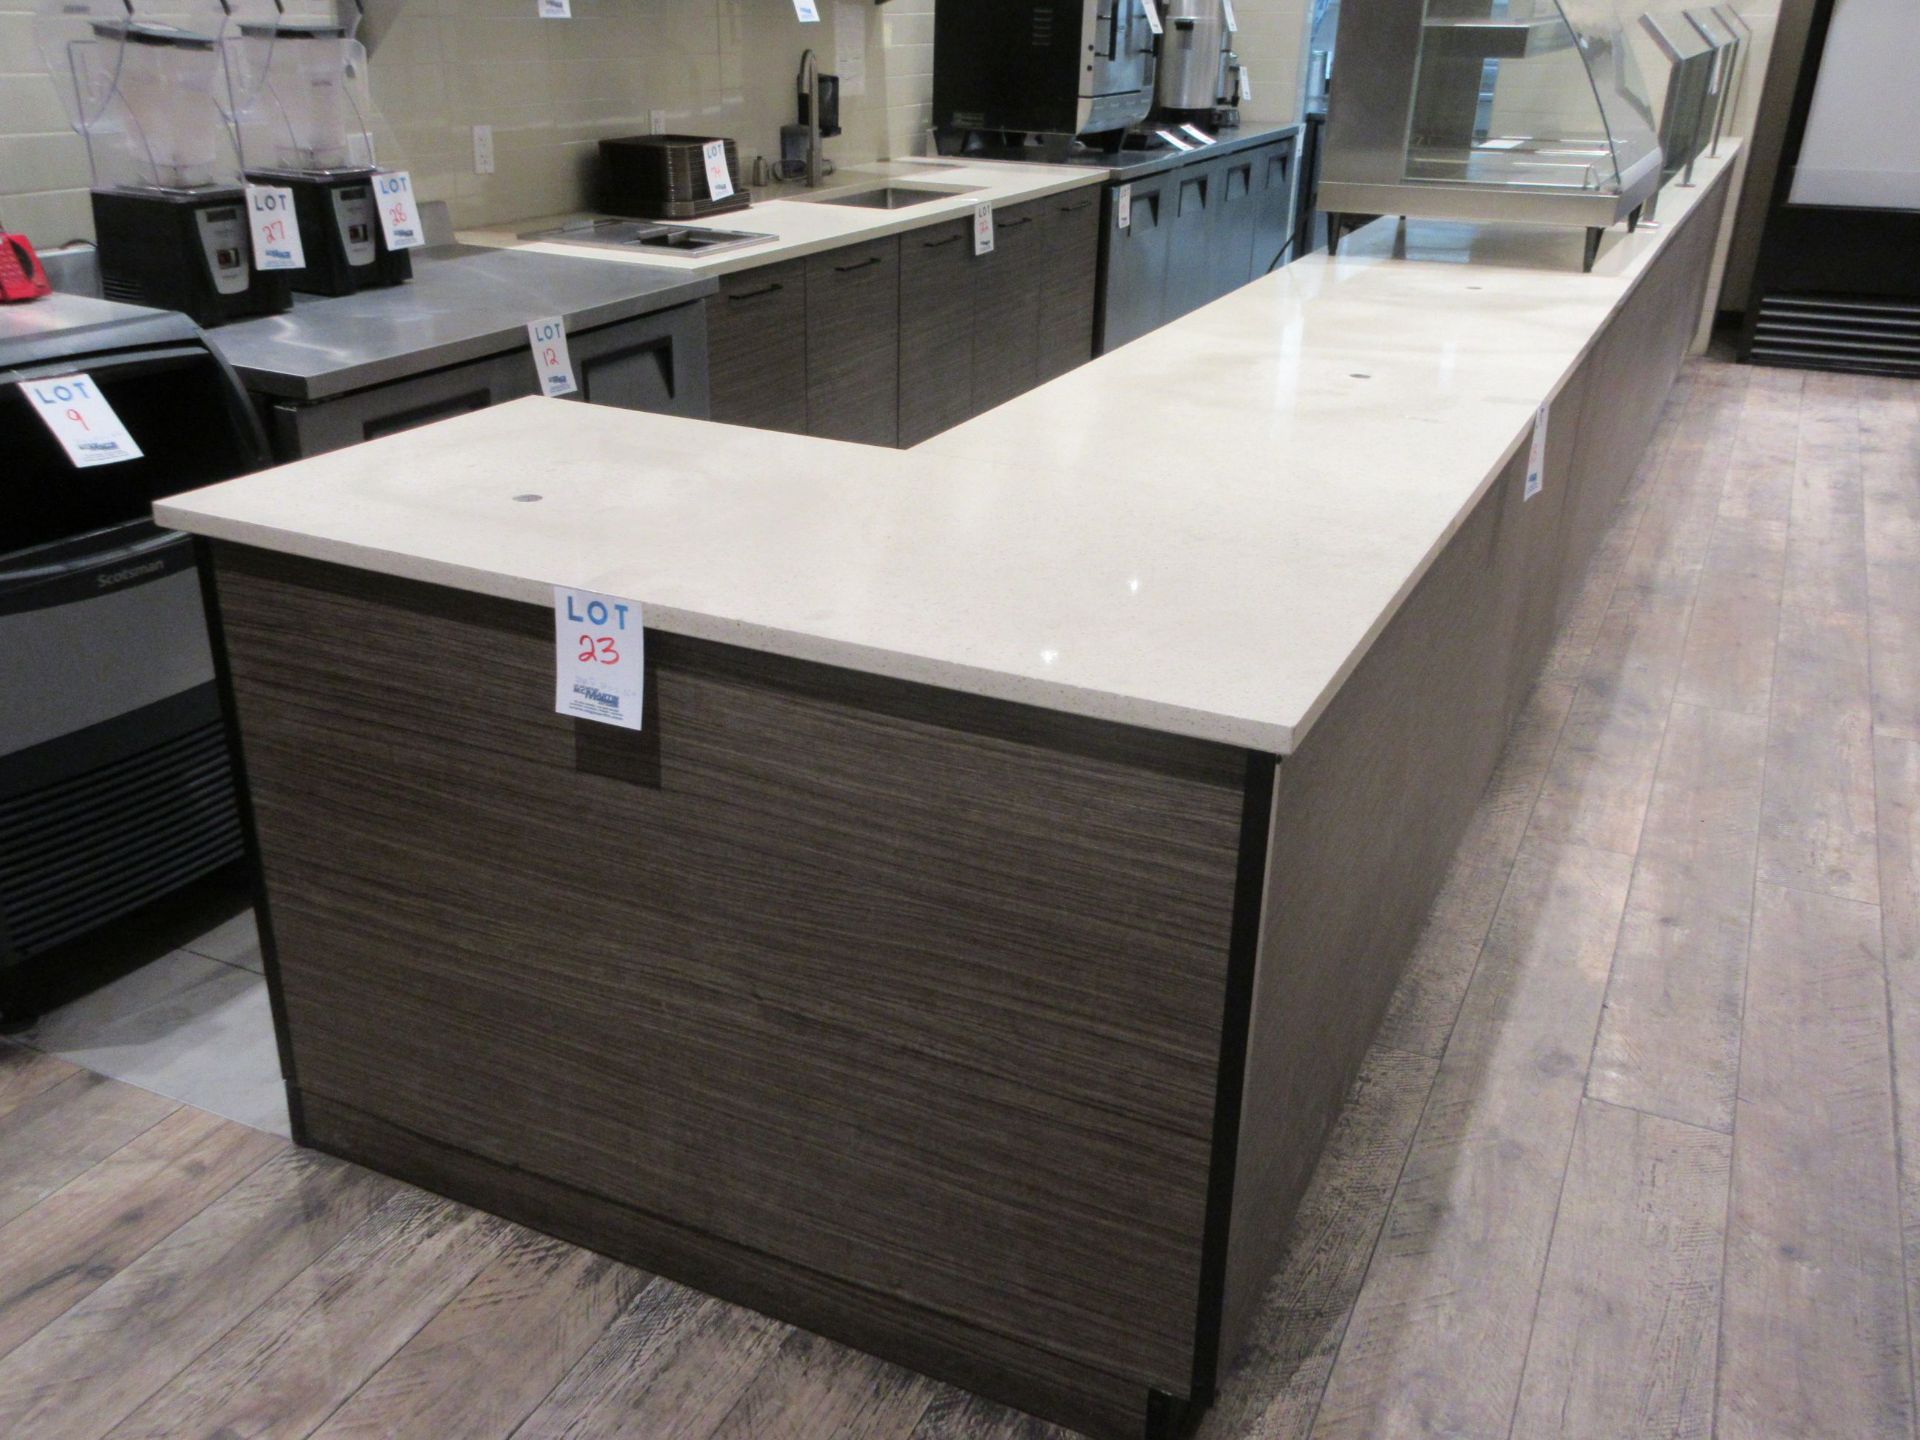 Counter c/w quartz countertop and glass display, 23 ft w x 29"d x 36"h